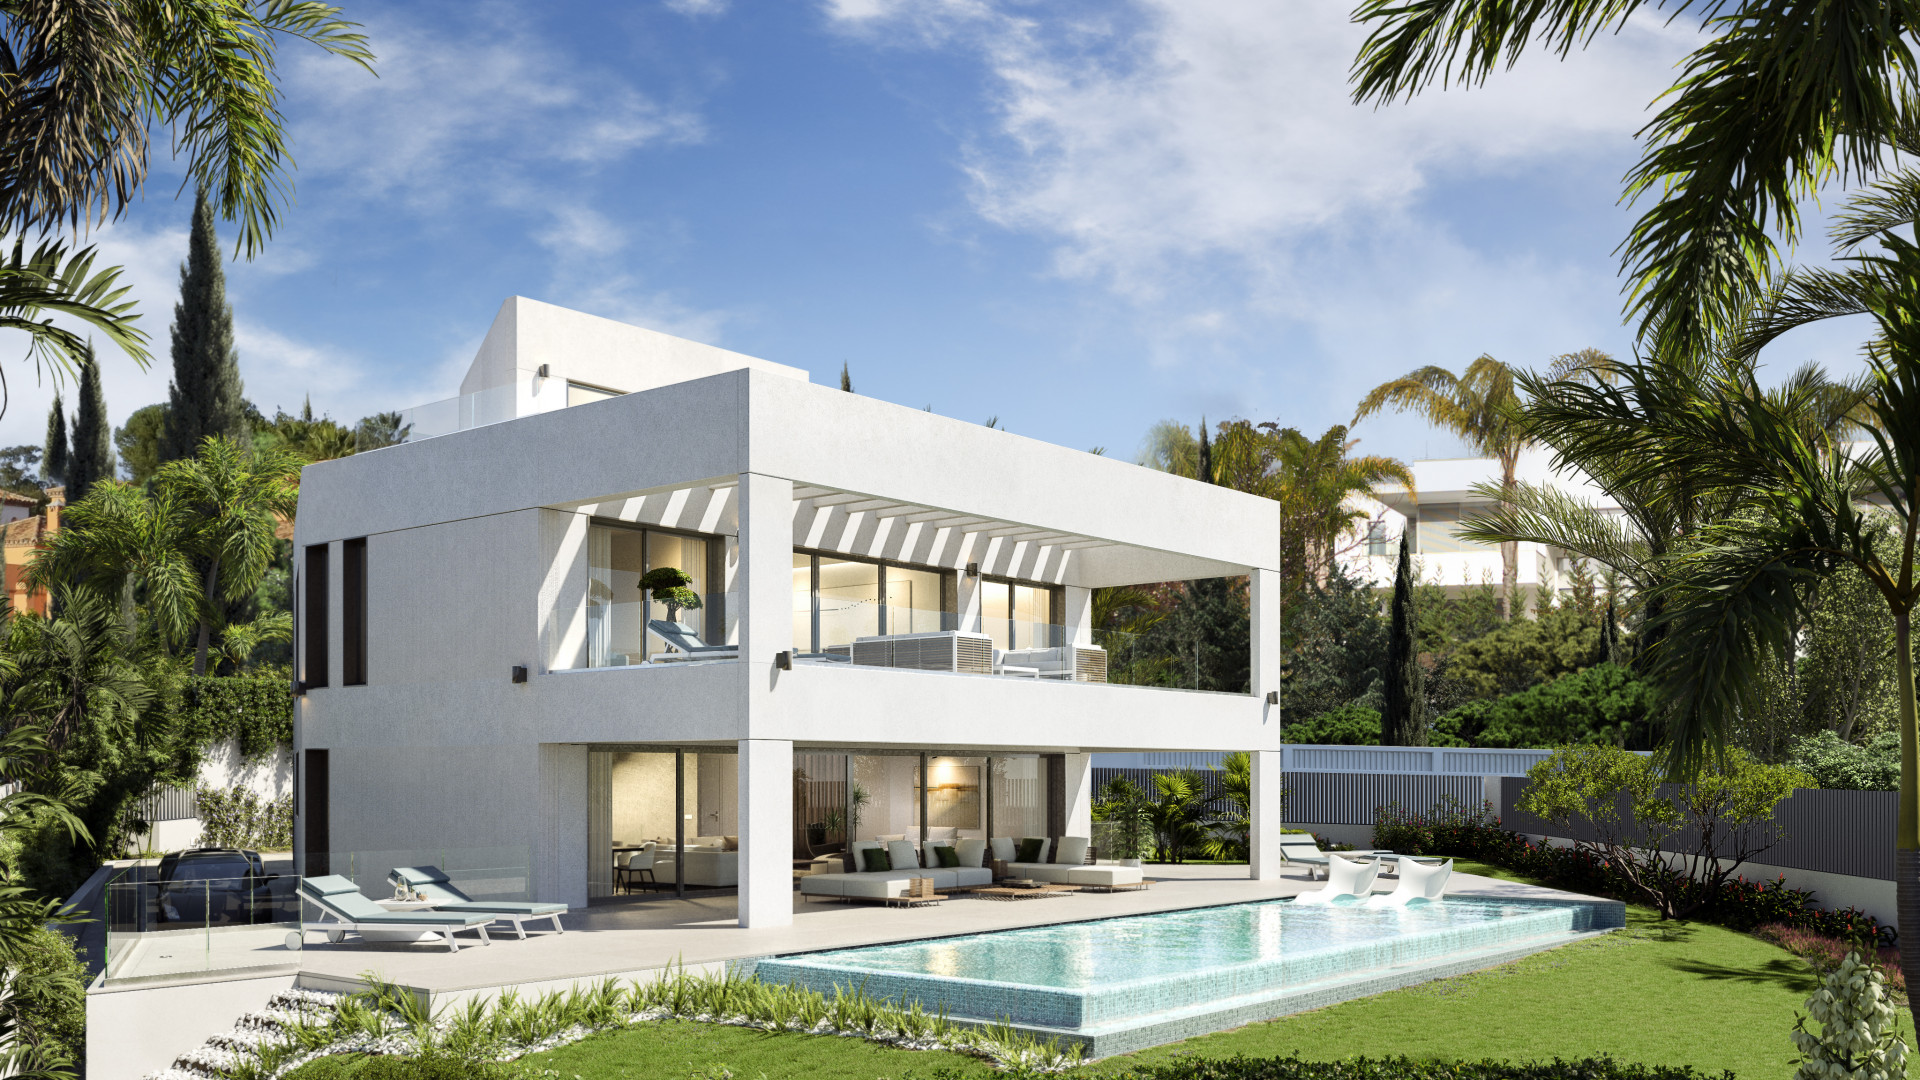 Brand new state-of-the-art design villa located in the most sought after area, Guadalmina Baja